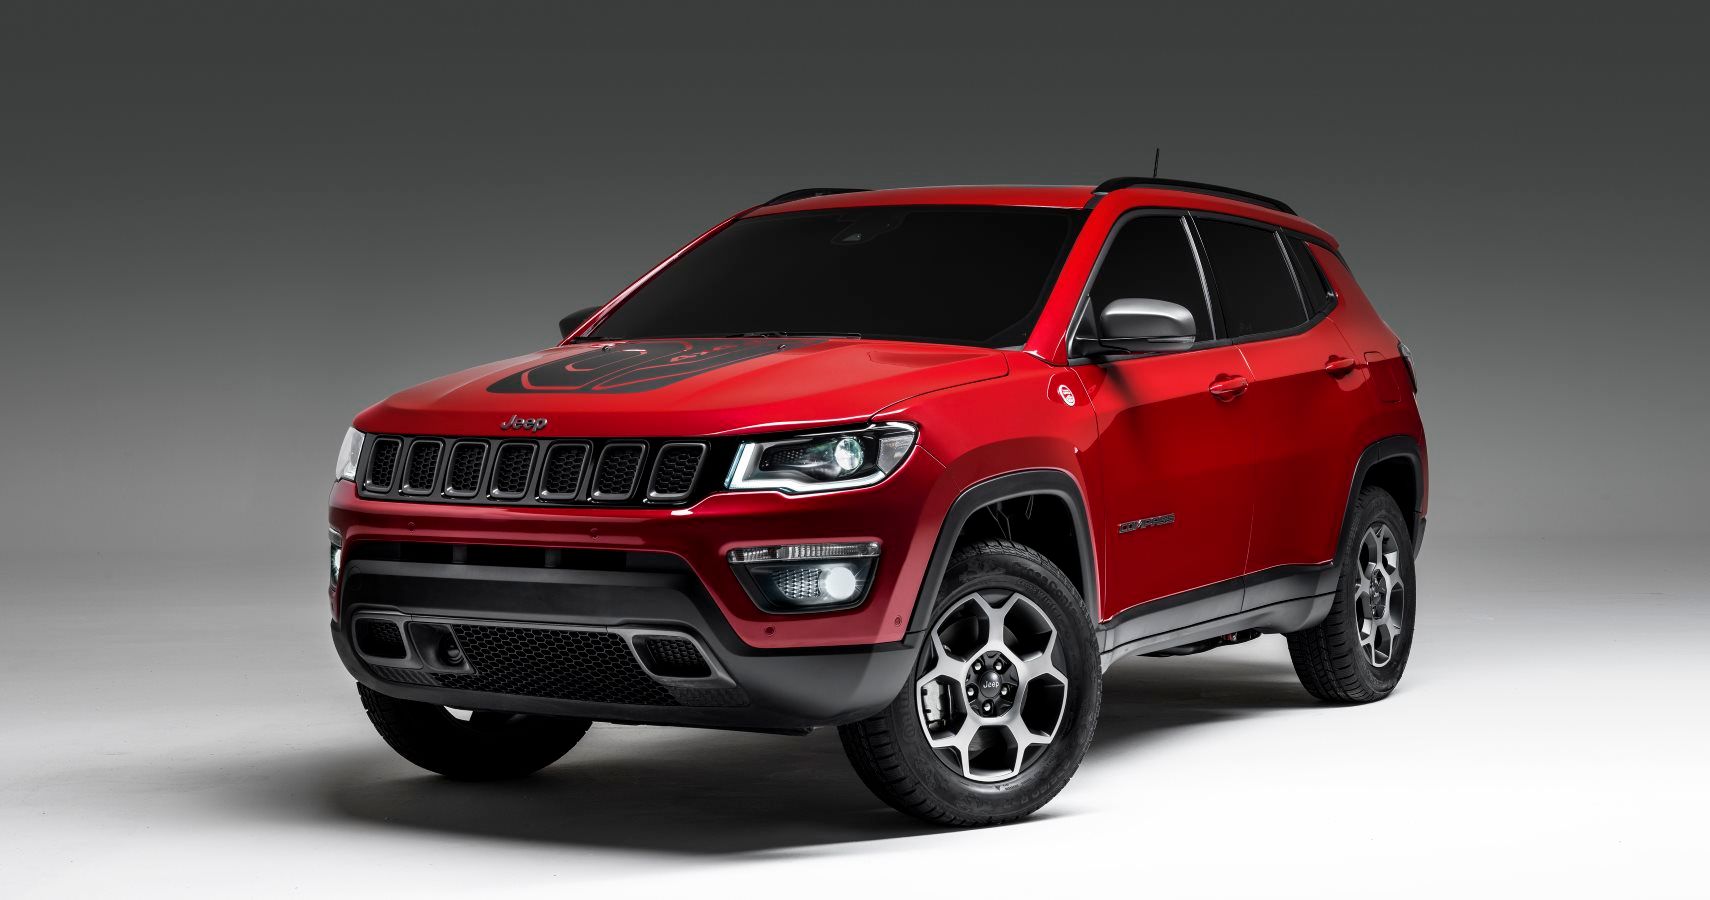 Jeep Finally Embraces Electrification With PlugIn Hybrid Compass, Renegade